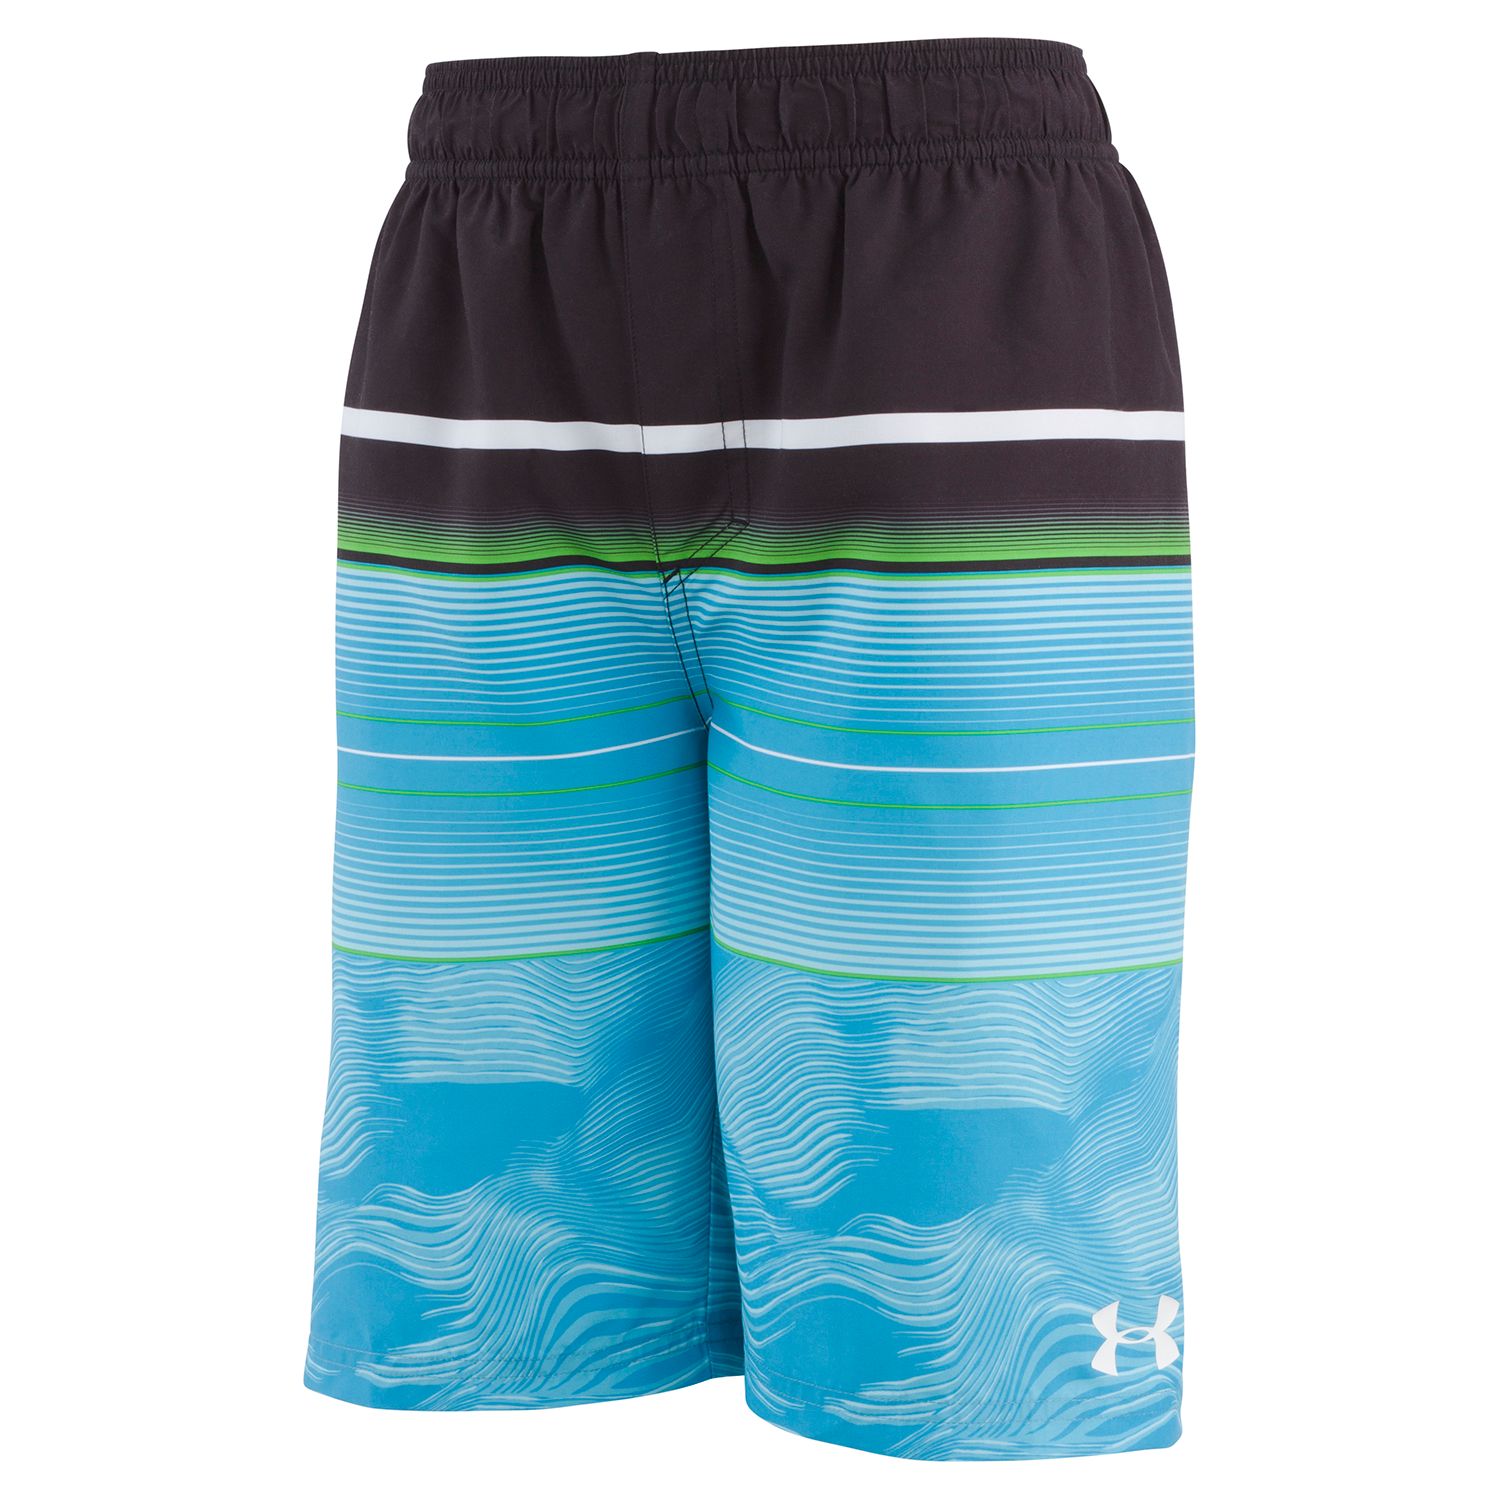 under armour volley shorts